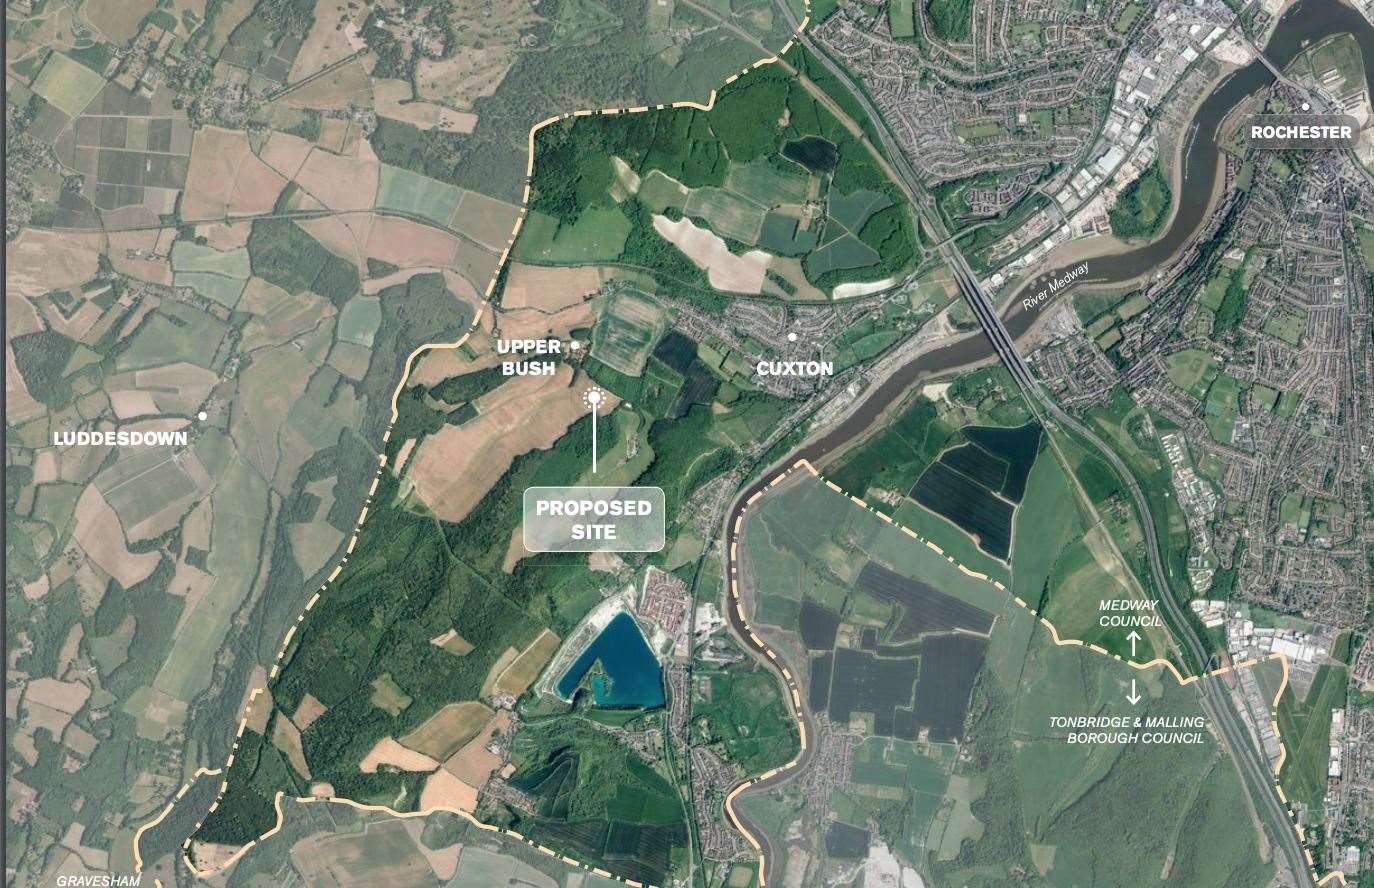 A site map showing the proposed location of Vineyard Farm's Ltd winery. Picture: Vineyard Farms Ltd/ Foster + Partners